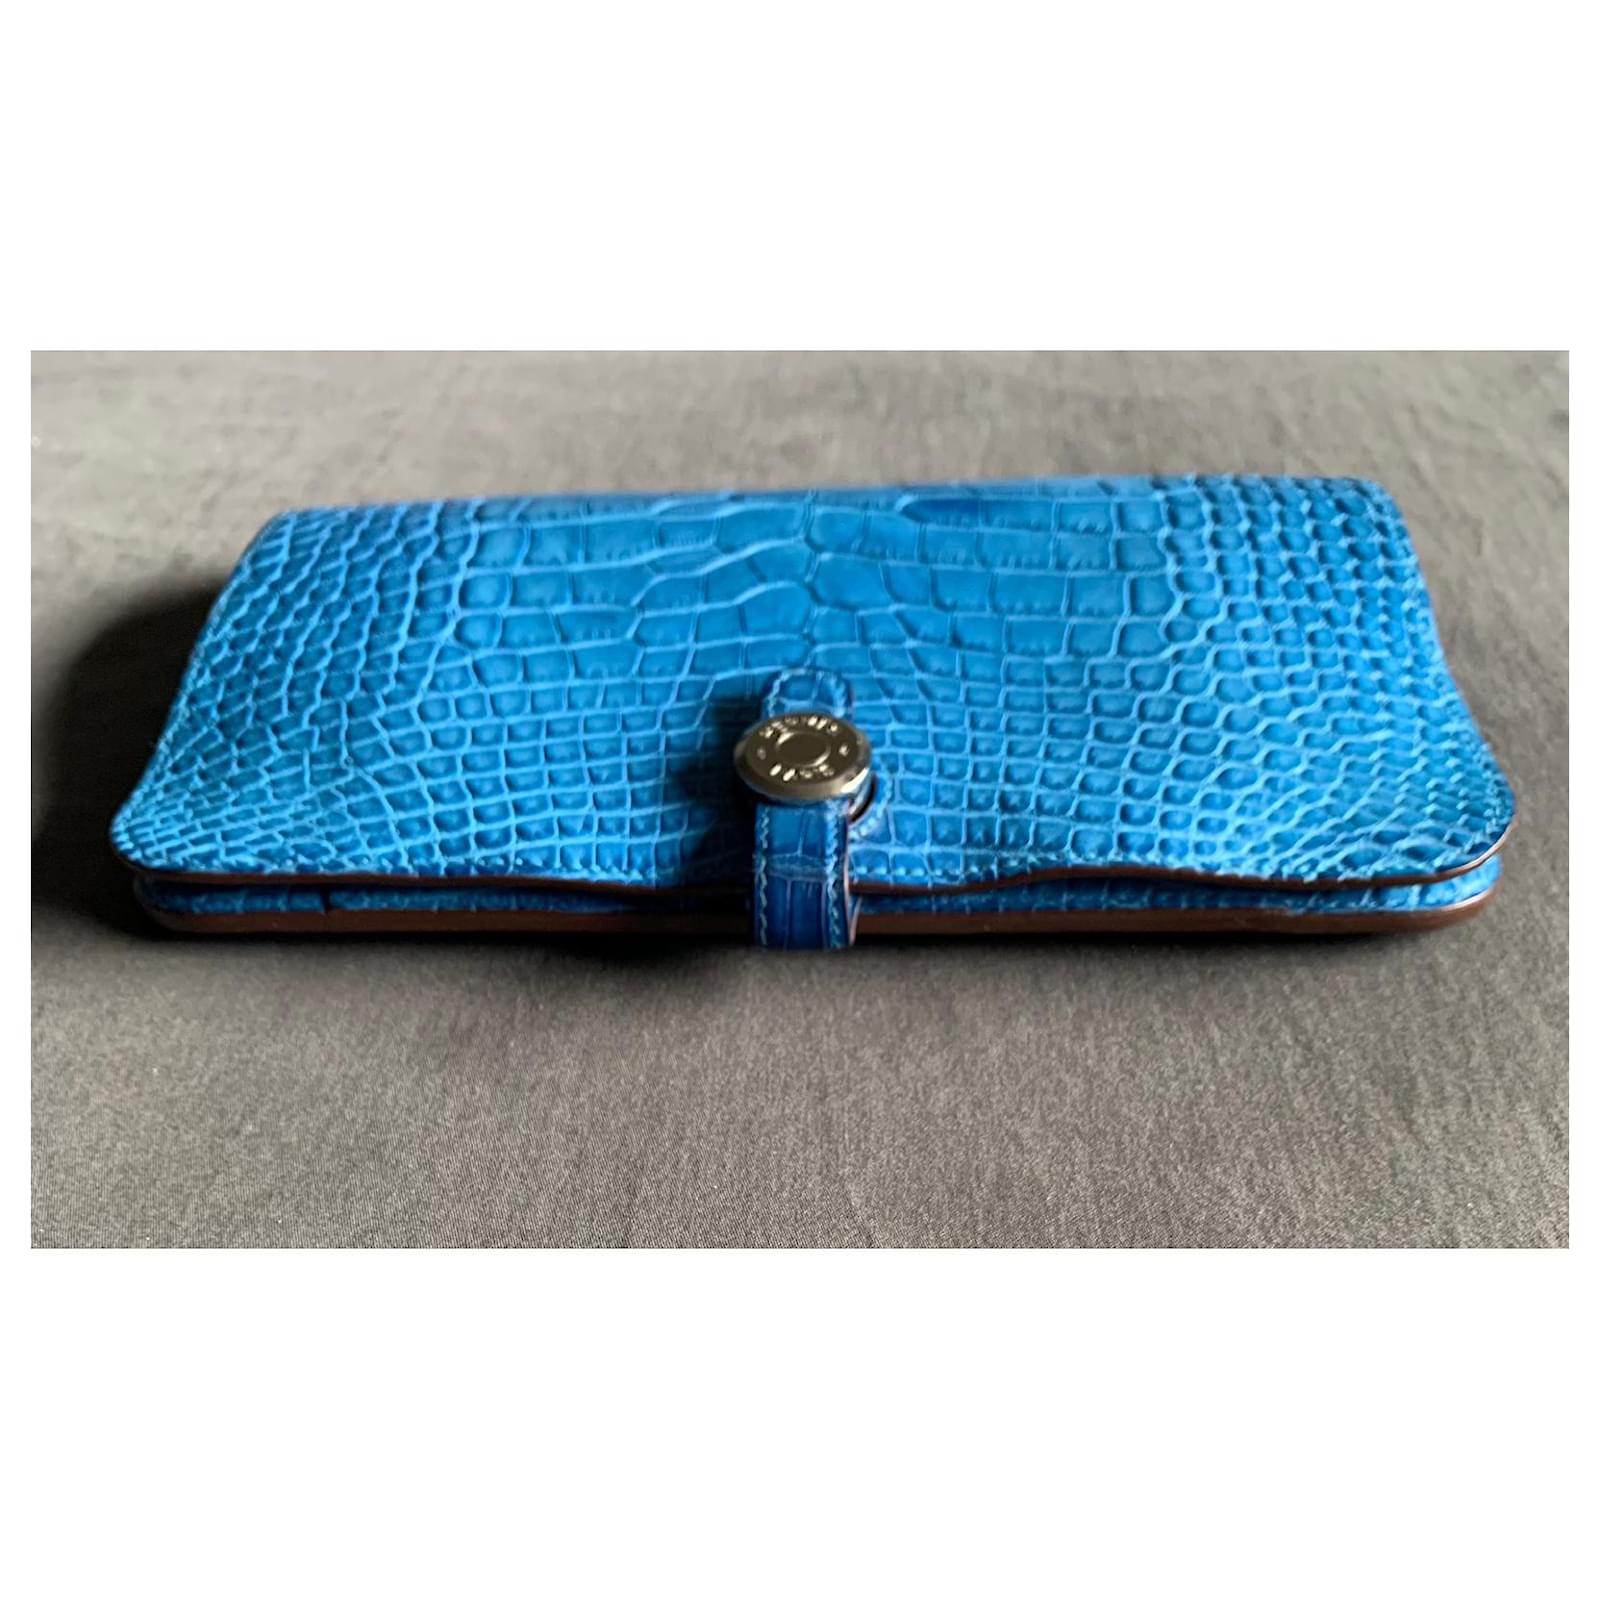 Replica Hermes Dogon Wallet In Blue Jean Leather Fake From China